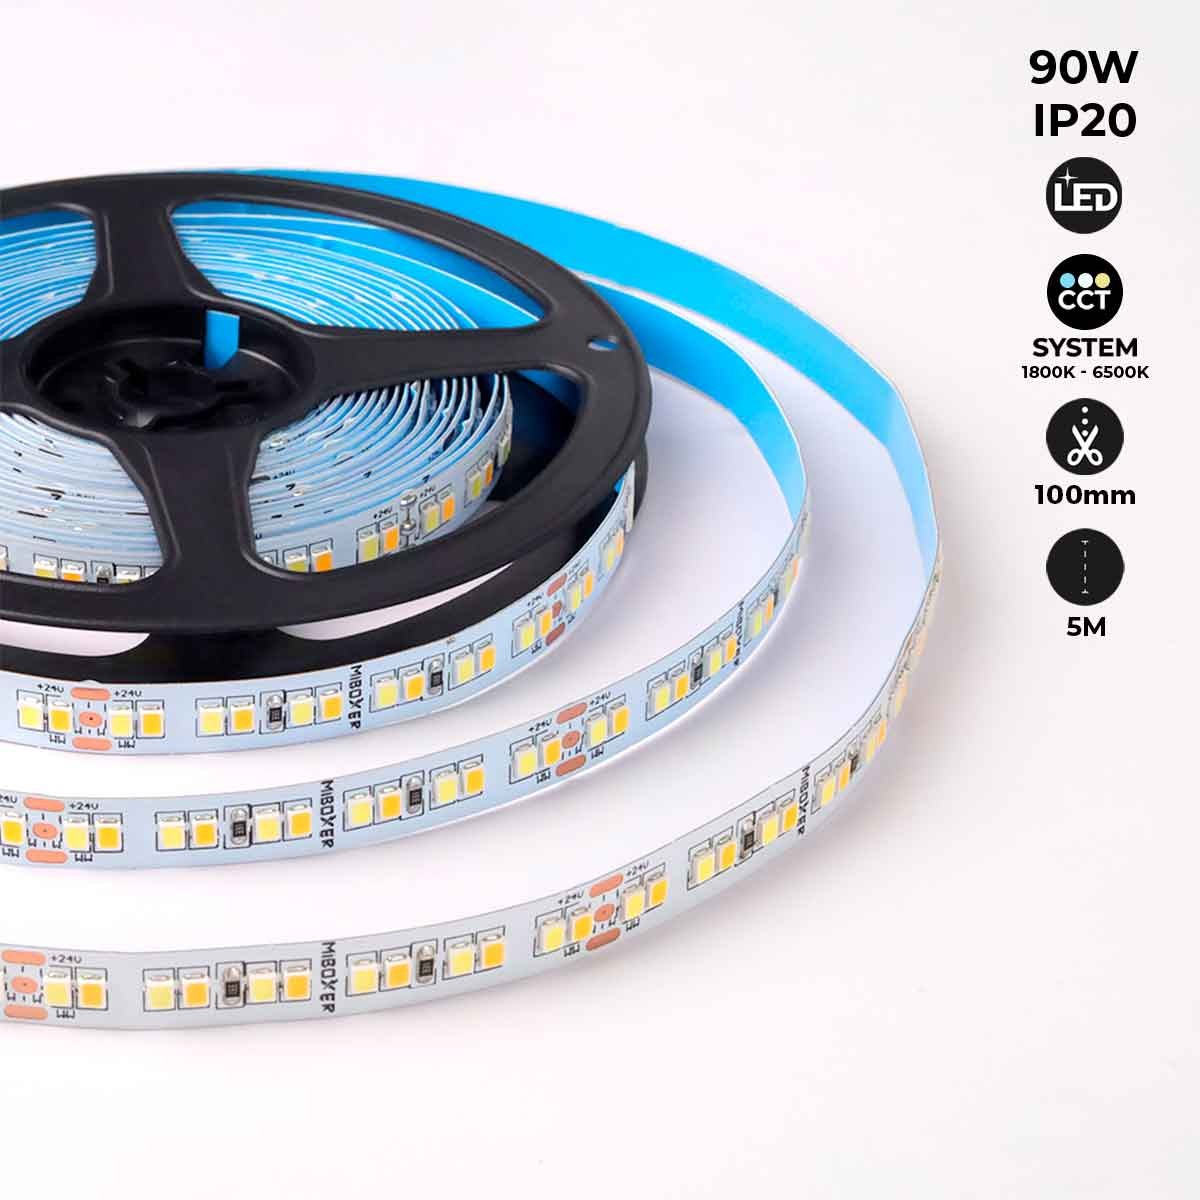 LED Strip 24V-DC - 90W - dimmable color temperature CCT - 1800-6500K - SMD2835 - 5 meter roll